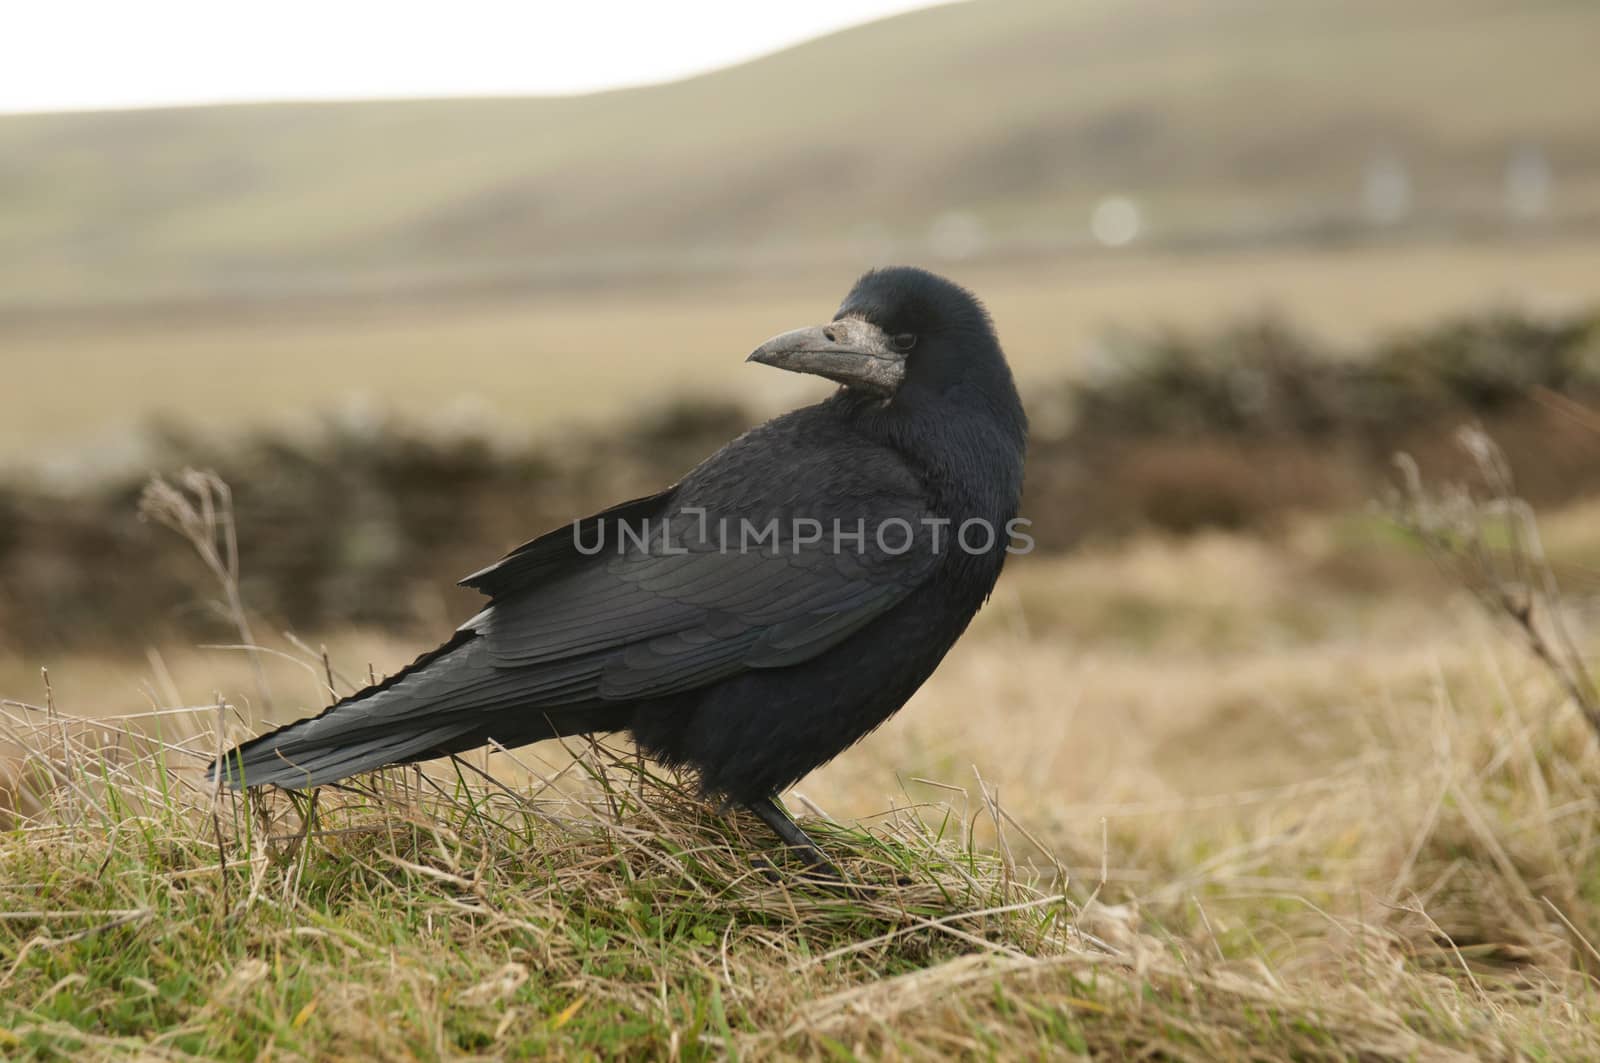 The Carrion Crow (Corvus corone) is a member of the passerine order of birds and the crow family which is native to western Europe and eastern Asia.